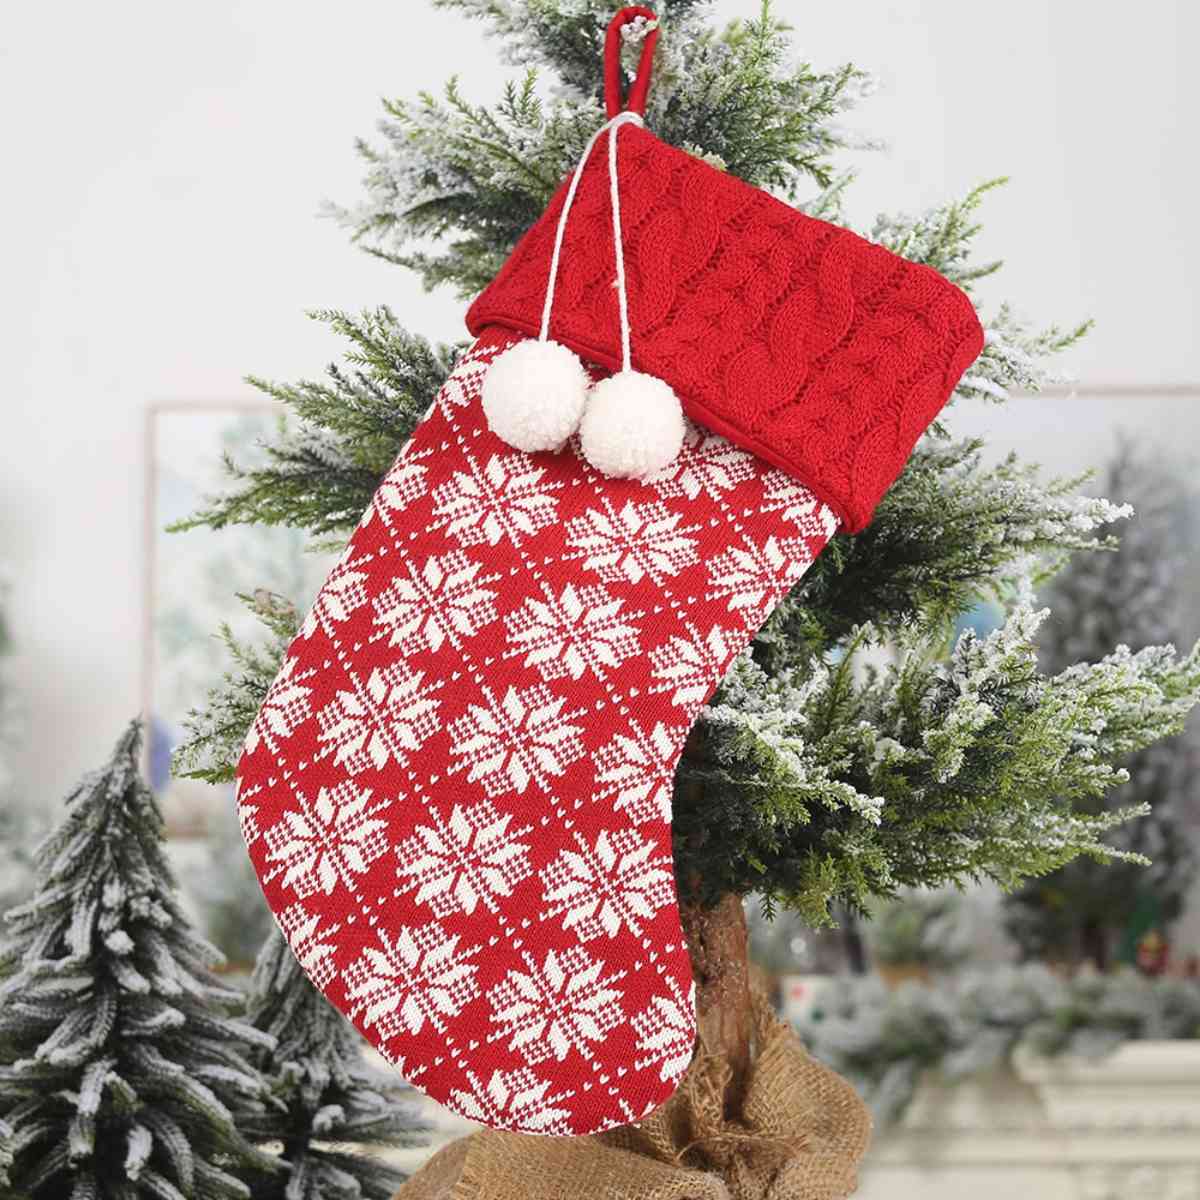 Christmas Stocking Hanging Widget in Assorted Styles 16.1" H x 7.5" W